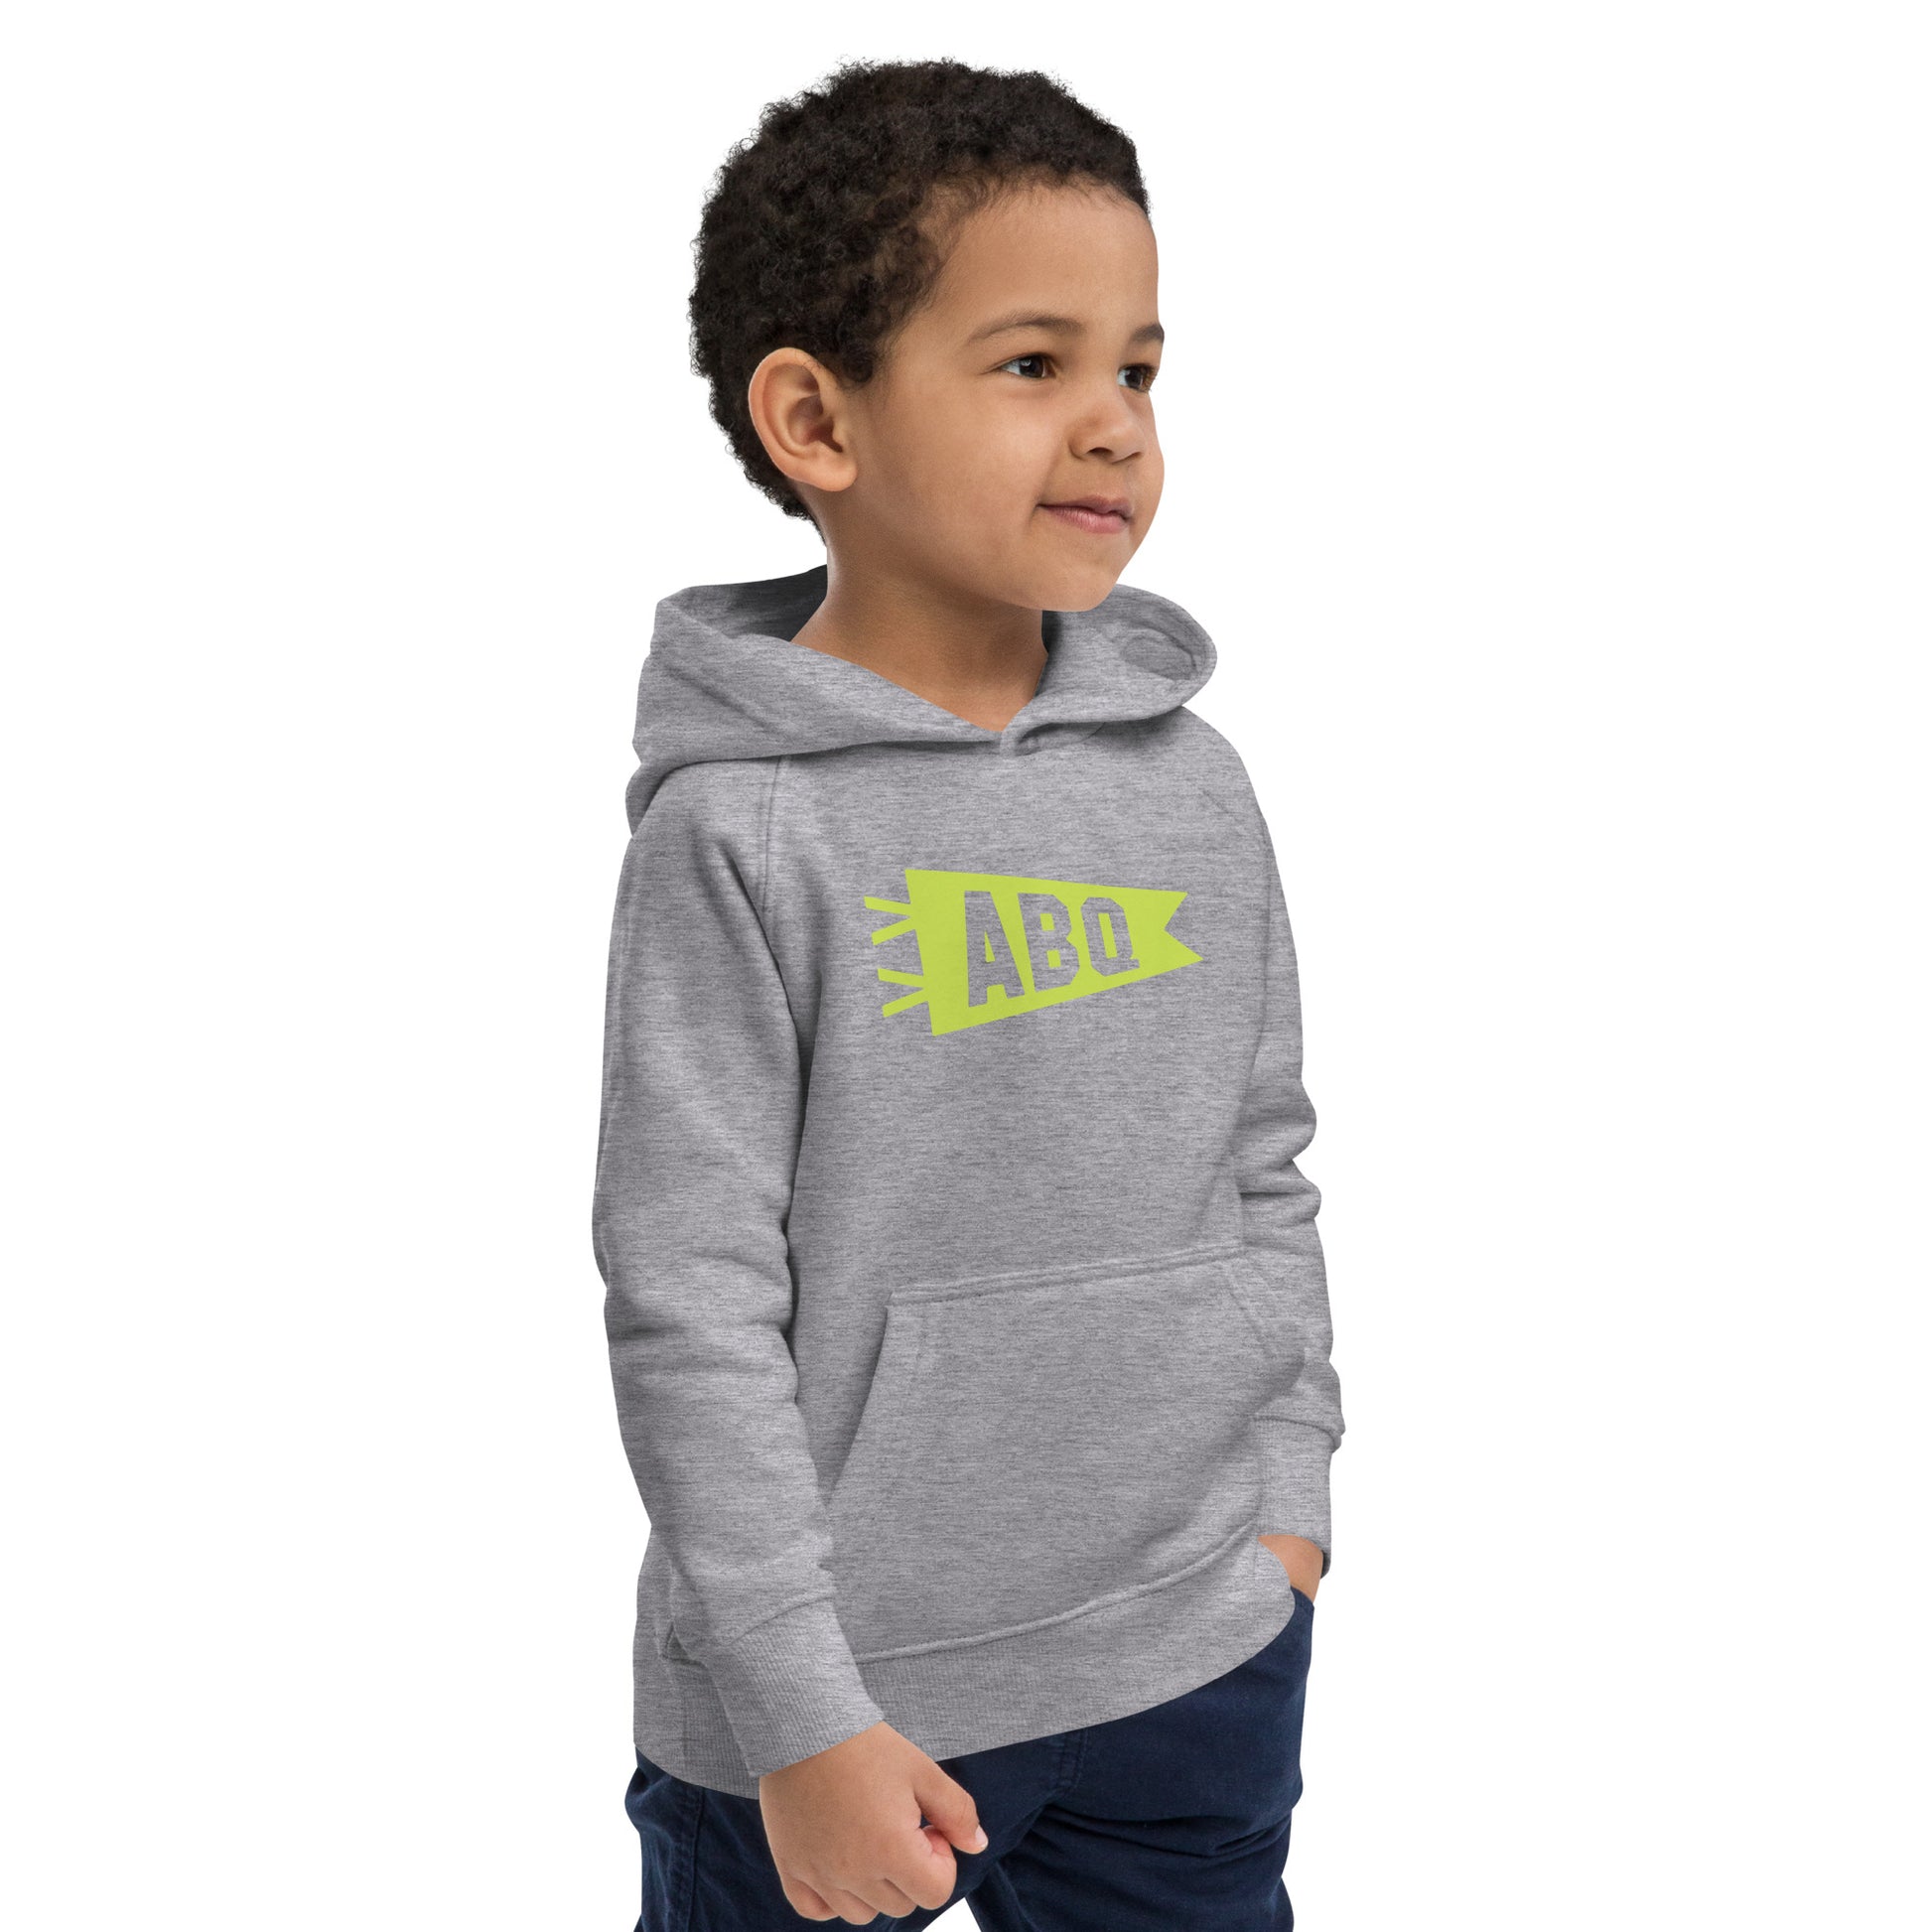 Kid's Sustainable Hoodie - Green Graphic • ABQ Albuquerque • YHM Designs - Image 13